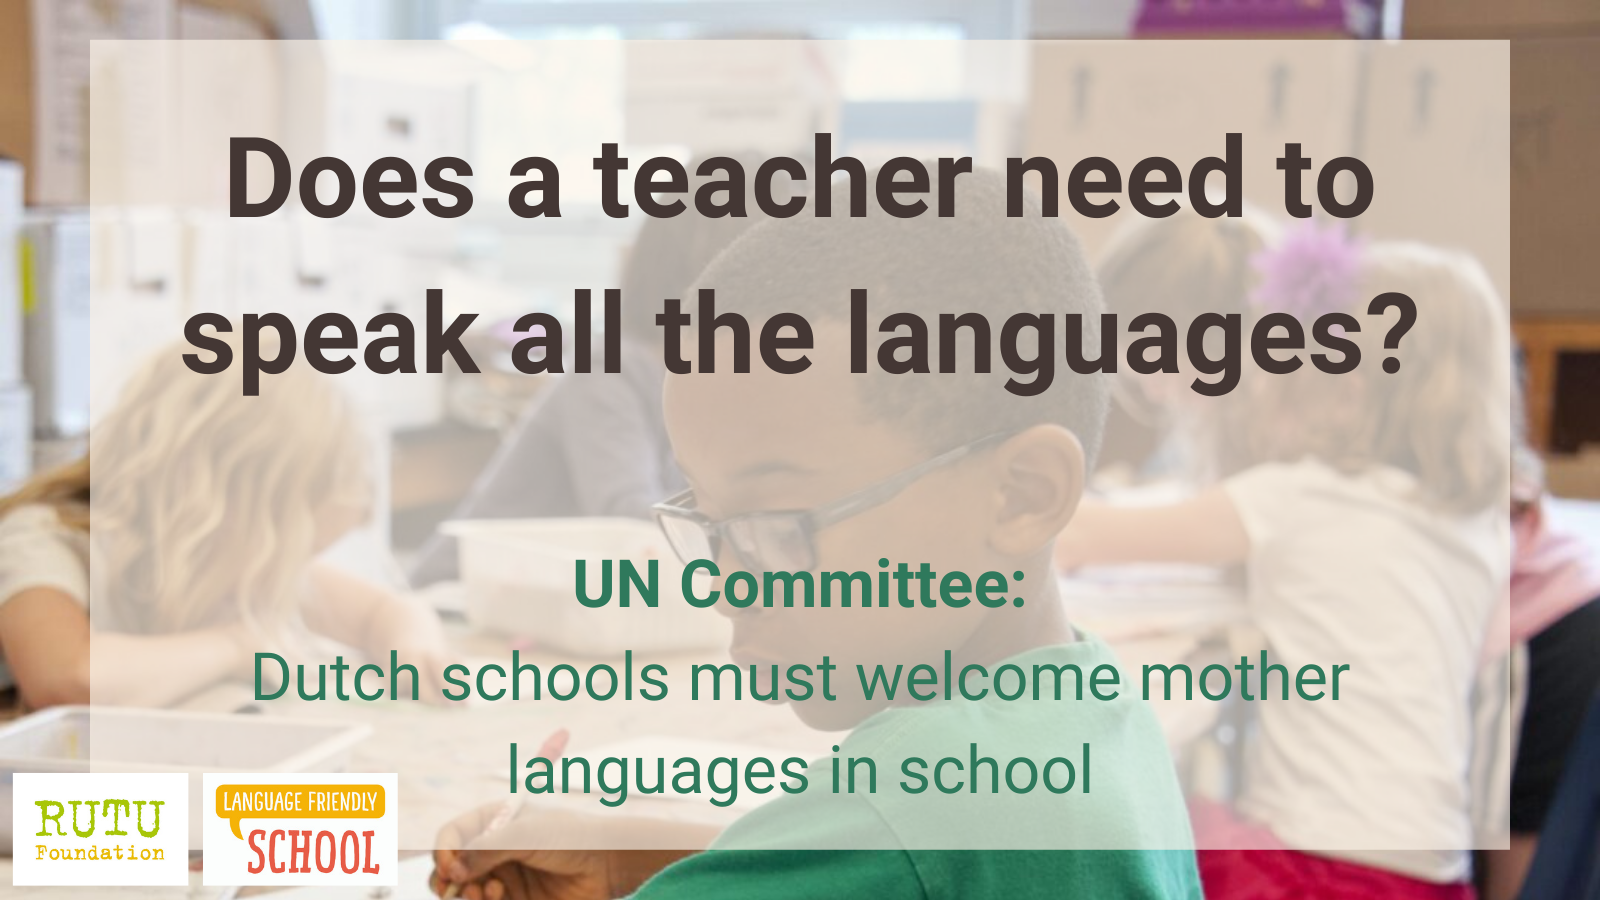 Featured image for “Does a teacher need to speak all the languages of their students?”